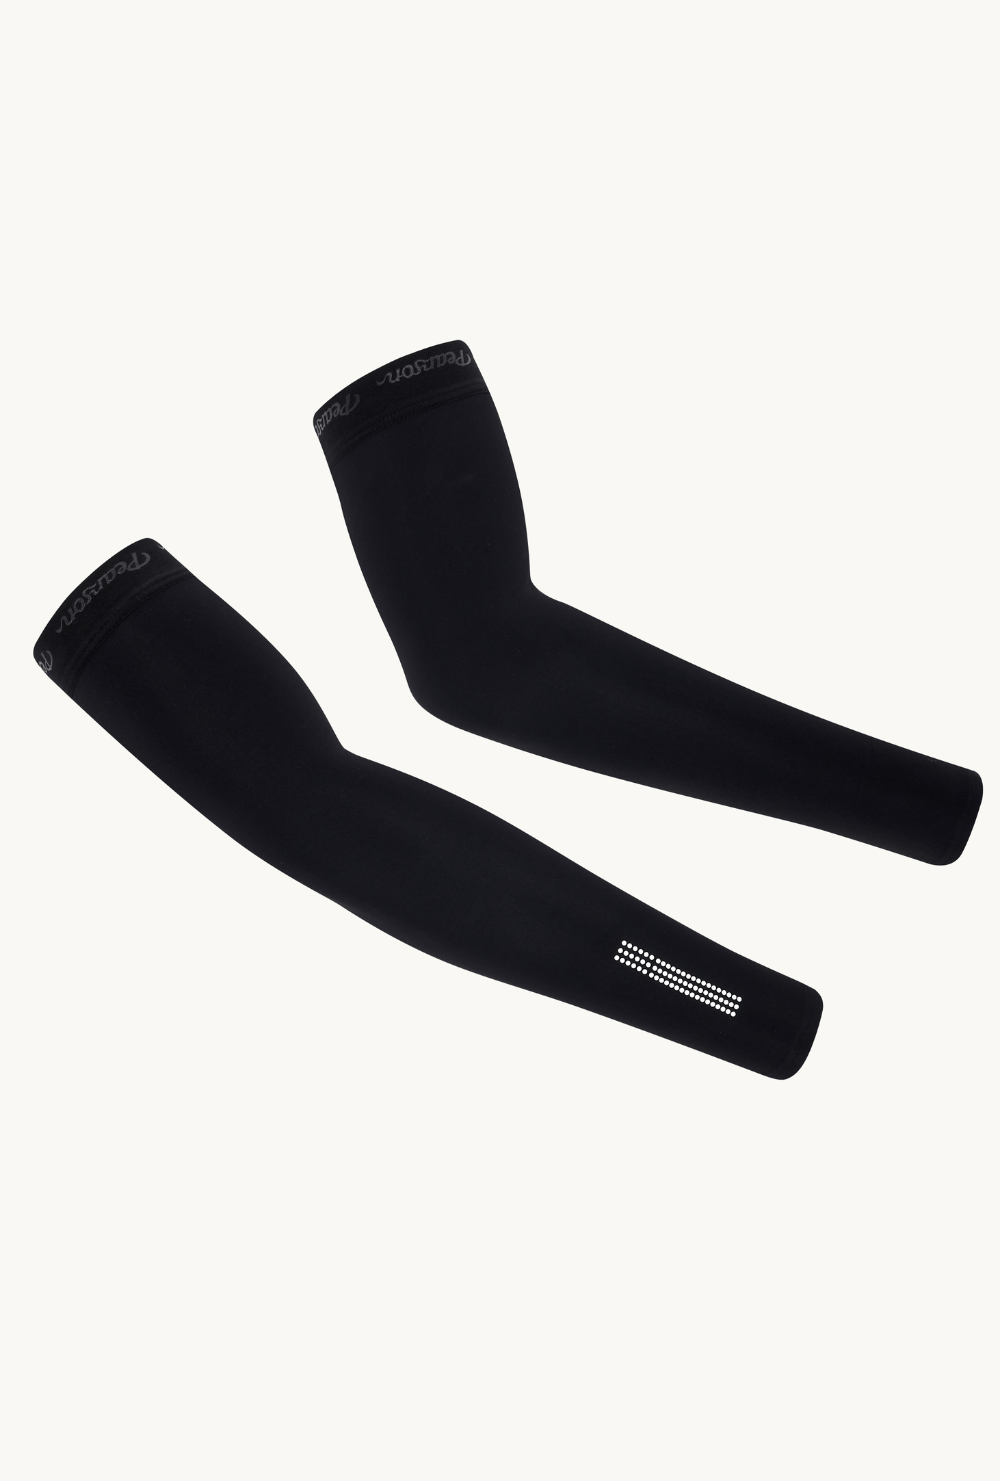 Pearson 1860  Call To Arms - Thermal Arm Warmers  Medium / Black